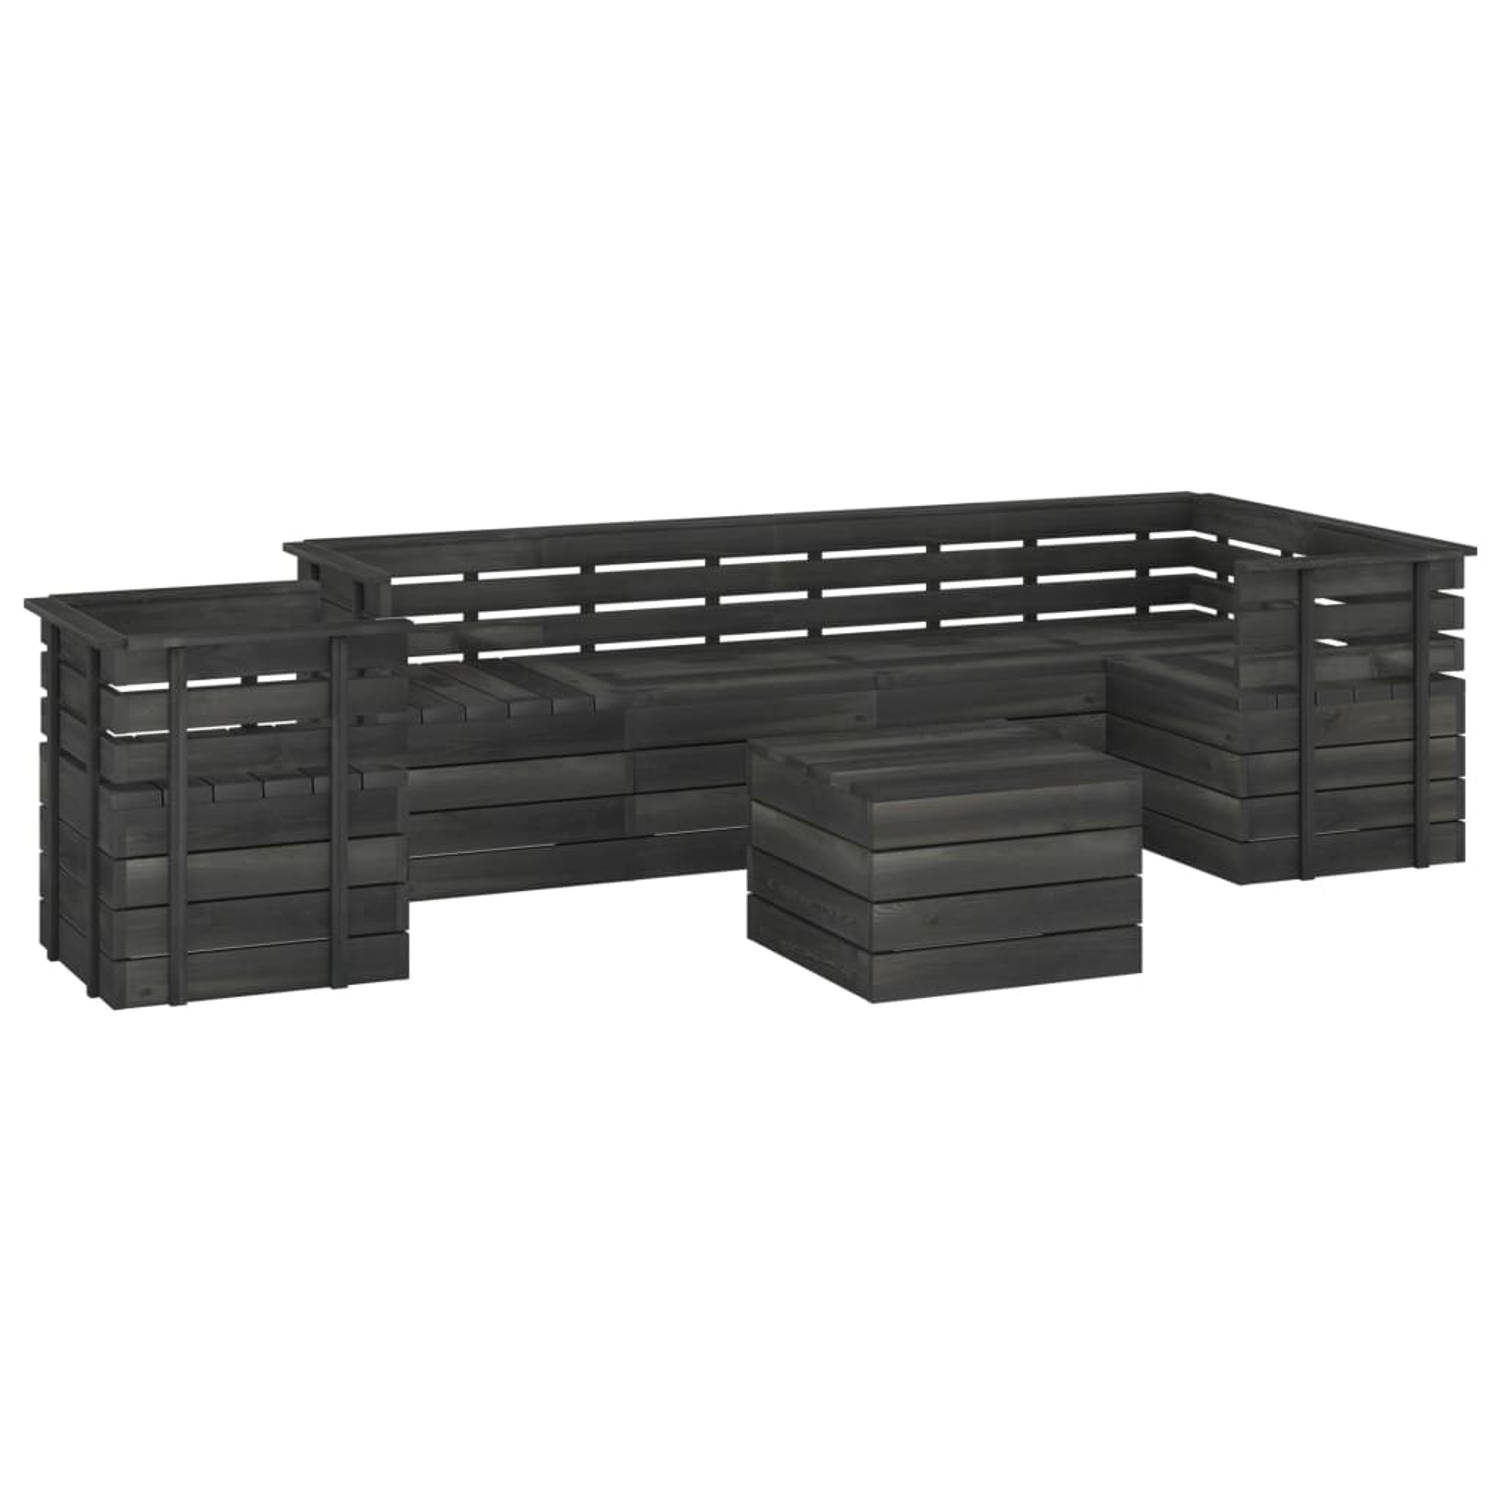 The Living Store 7-delige Loungeset pallet massief grenenhout donkergrijs - Tuinset